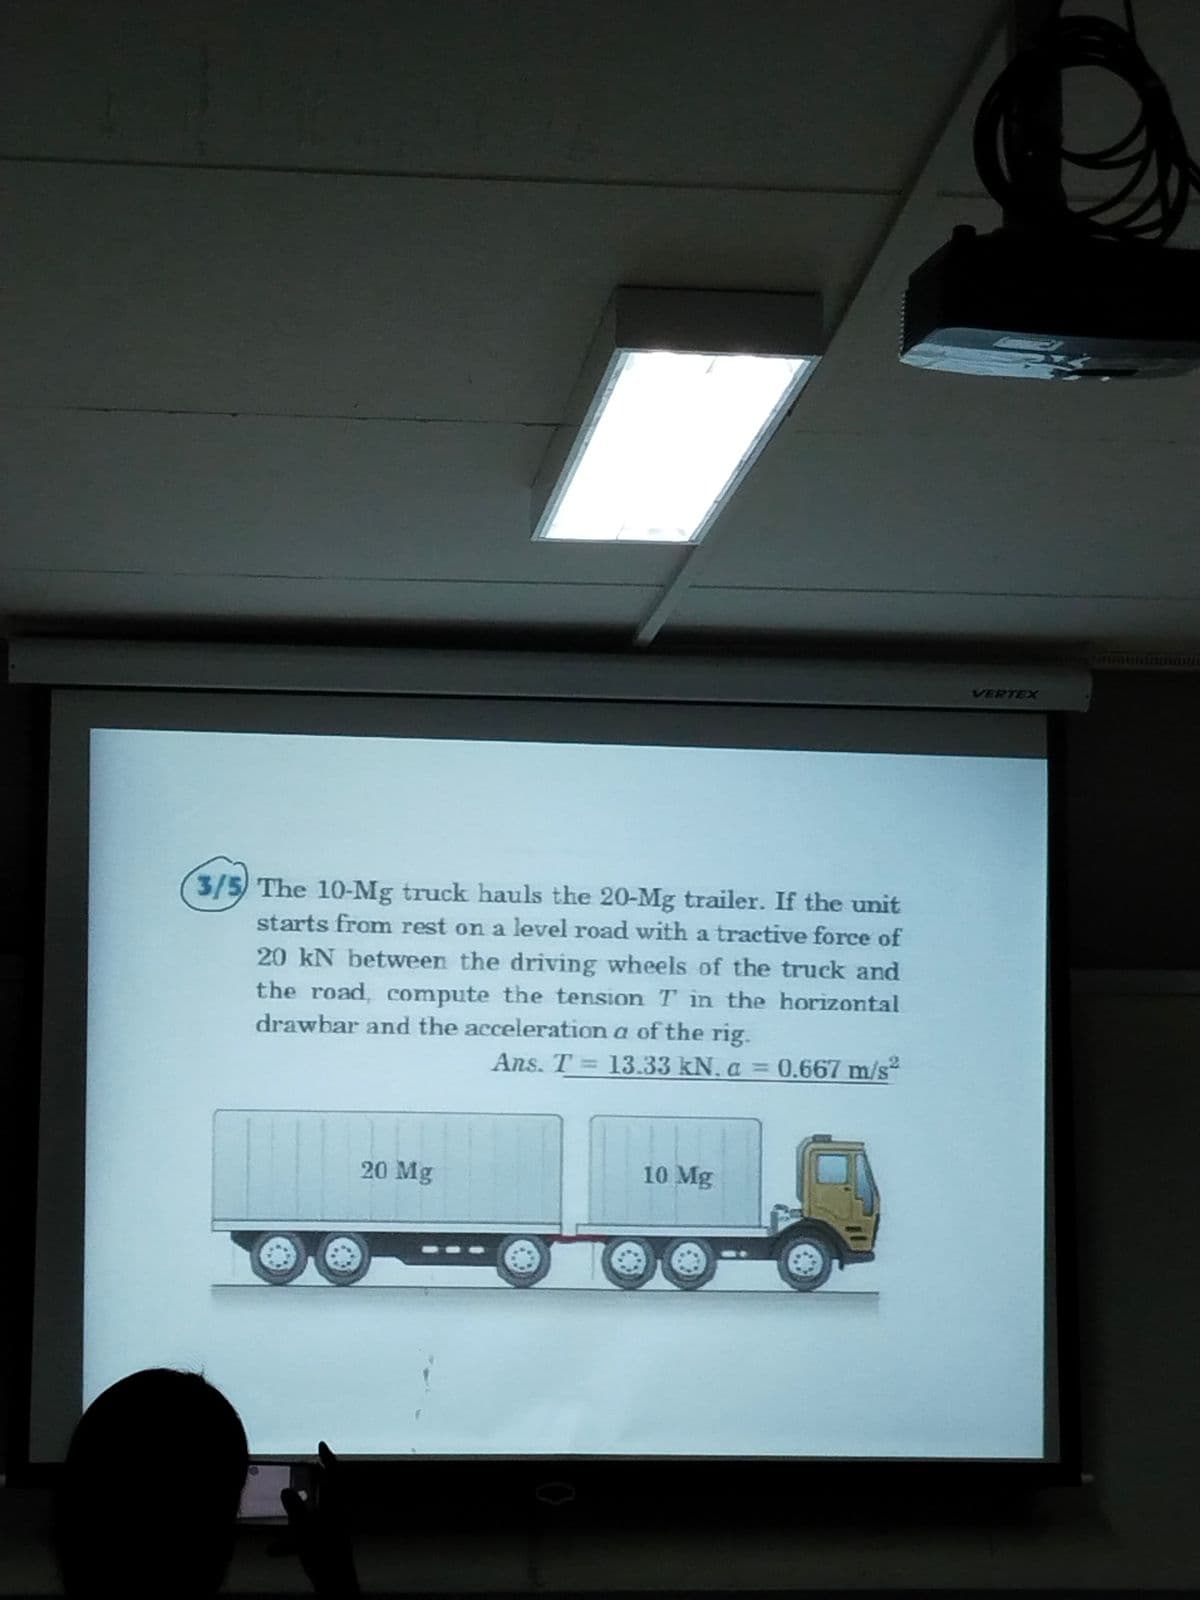 3/5) The 10-Mg truck hauls the 20-Mg trailer. If the unit
starts from rest on a level road with a tractive force of
20 kN between the driving wheels of the truck and
the road, compute the tension T in the horizontal
drawbar and the acceleration a of the rig.
Ans. T = 13.33 kN. a = 0.667 m/s
20 Mg
10 Mg